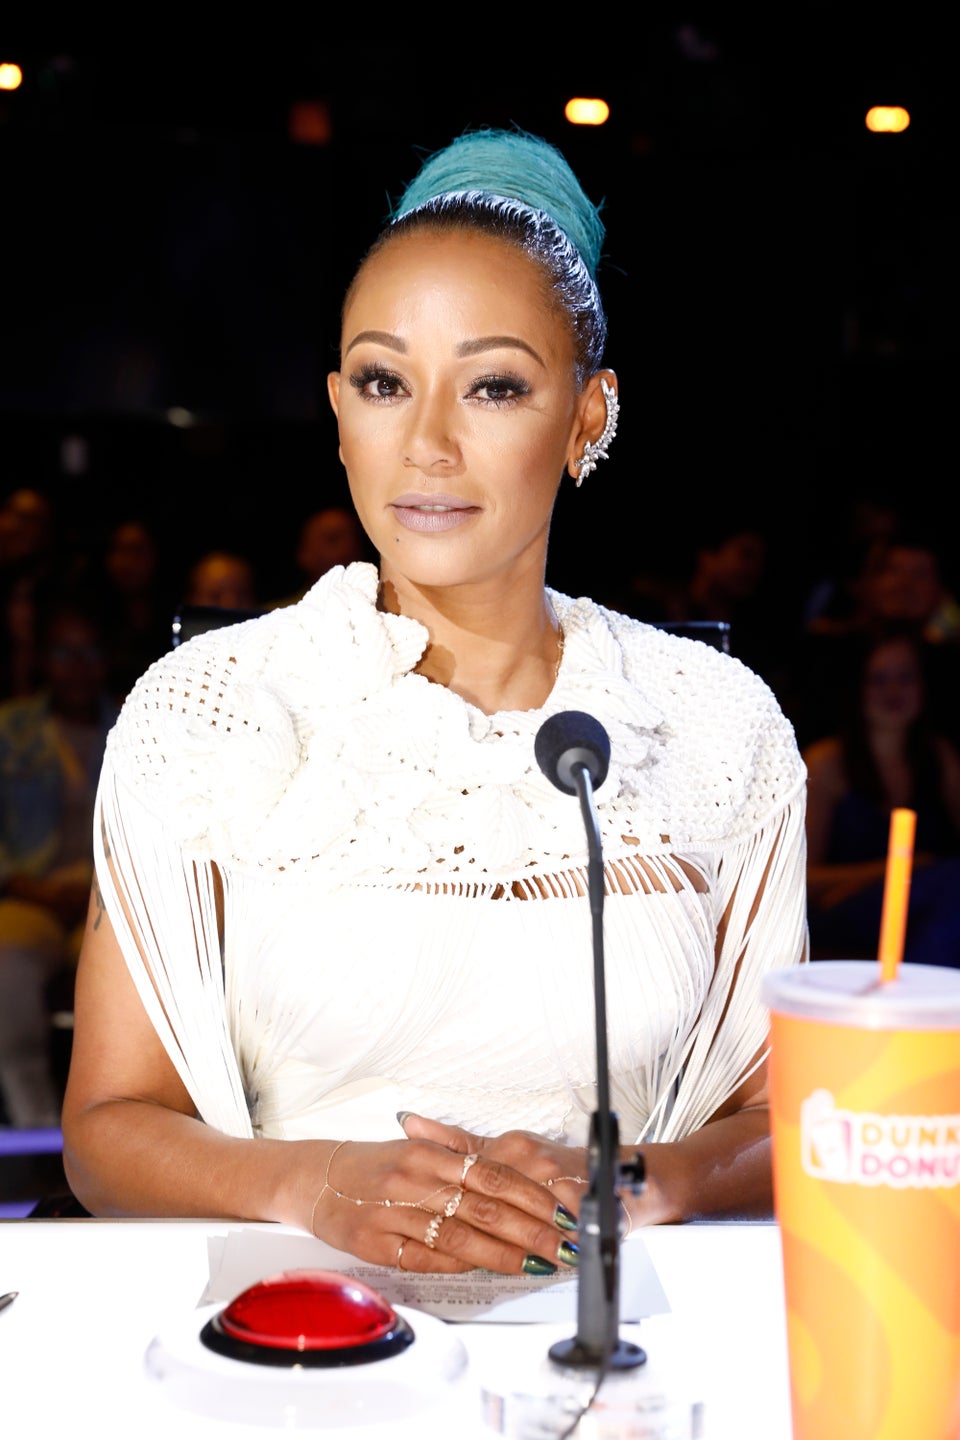 Mel B Cuts Ex-Husband Out Of Her Life And Body By Having Tattoo Of His Name Sliced Off